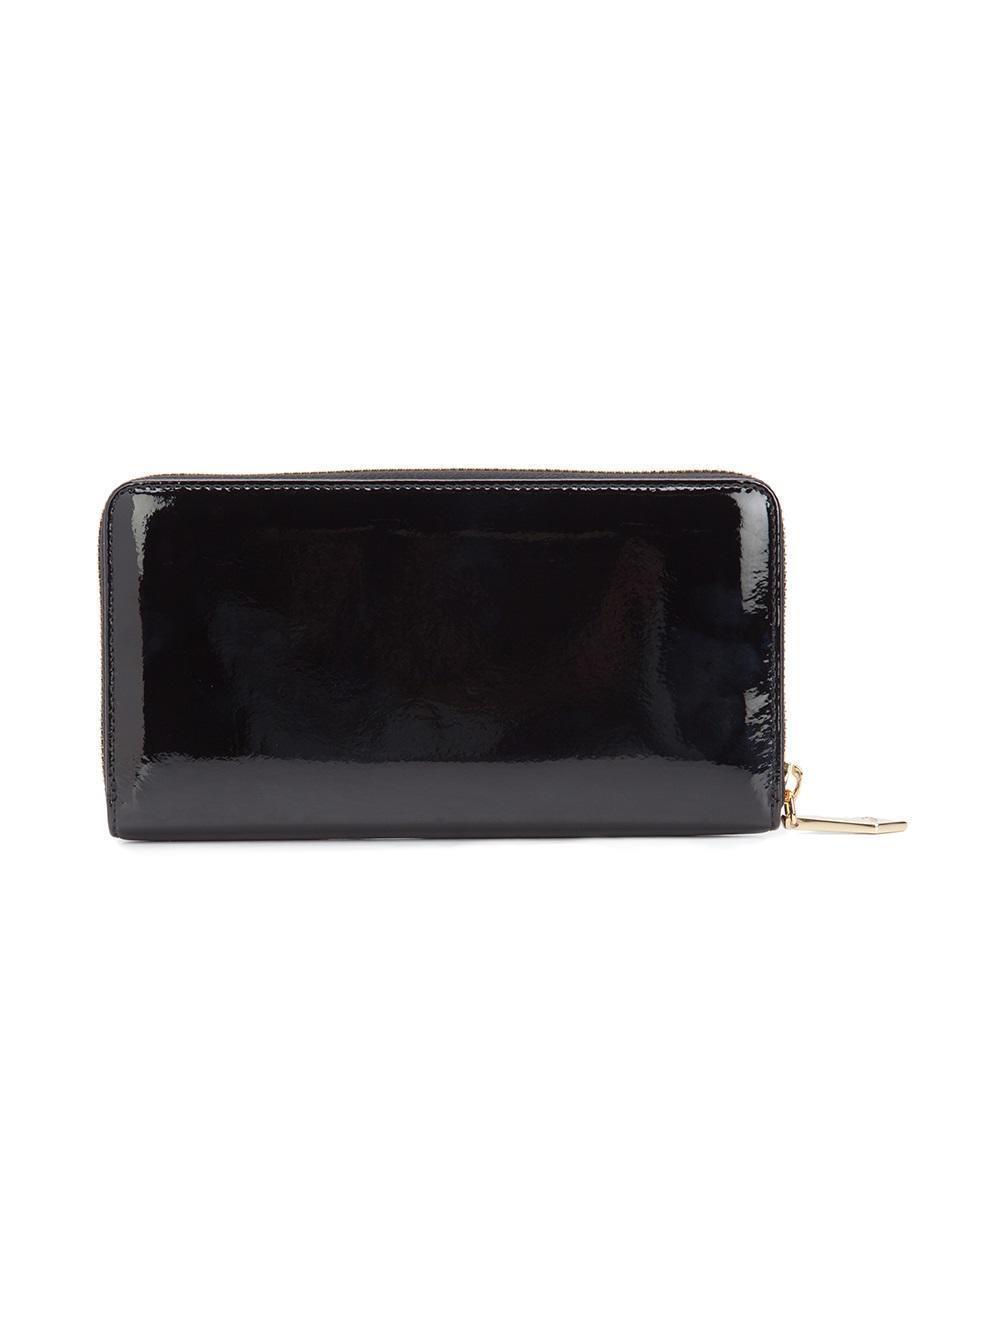 Urban Expressions Fifi Patent Wallet